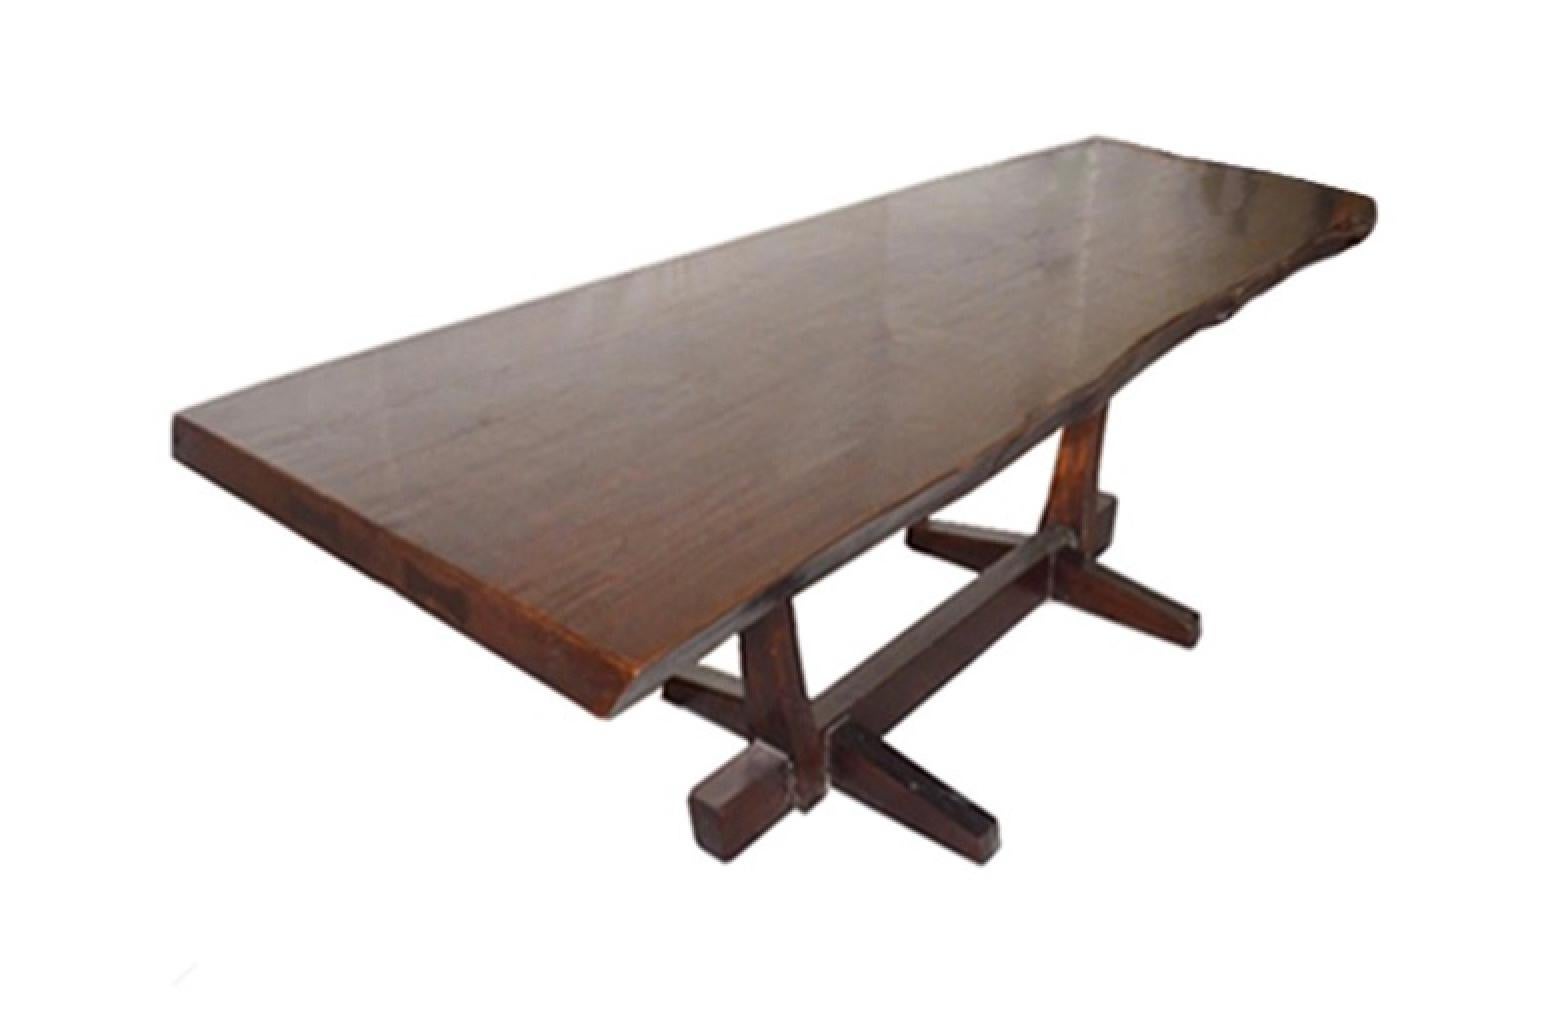 Andrianna Shamaris Live Edge Teak Wood Dining Table In Excellent Condition For Sale In New York, NY